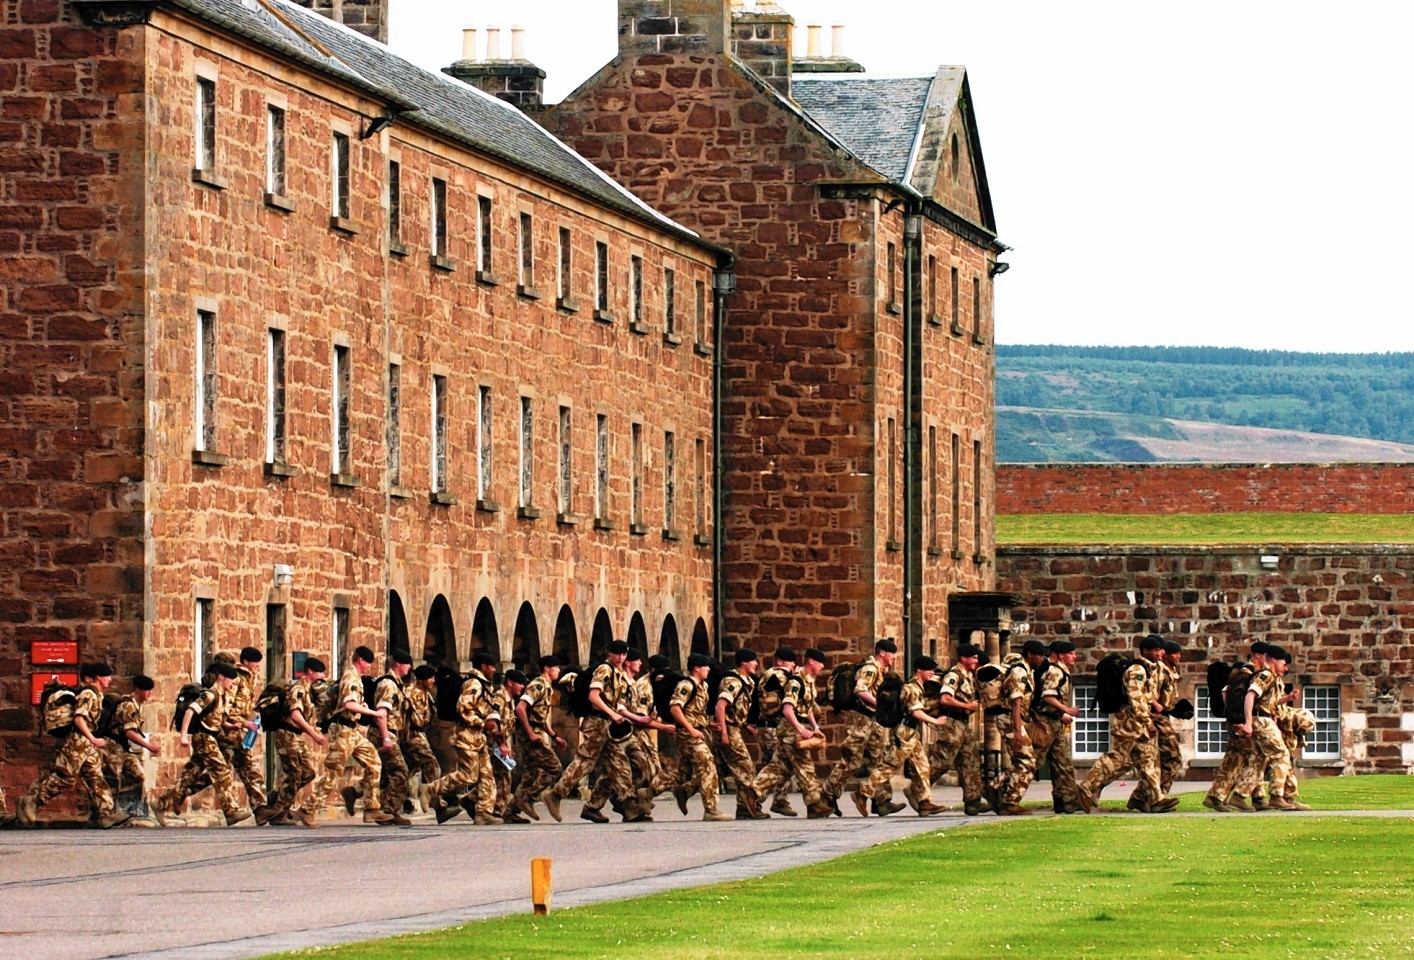 Soldiers at Fort George near Inverness.